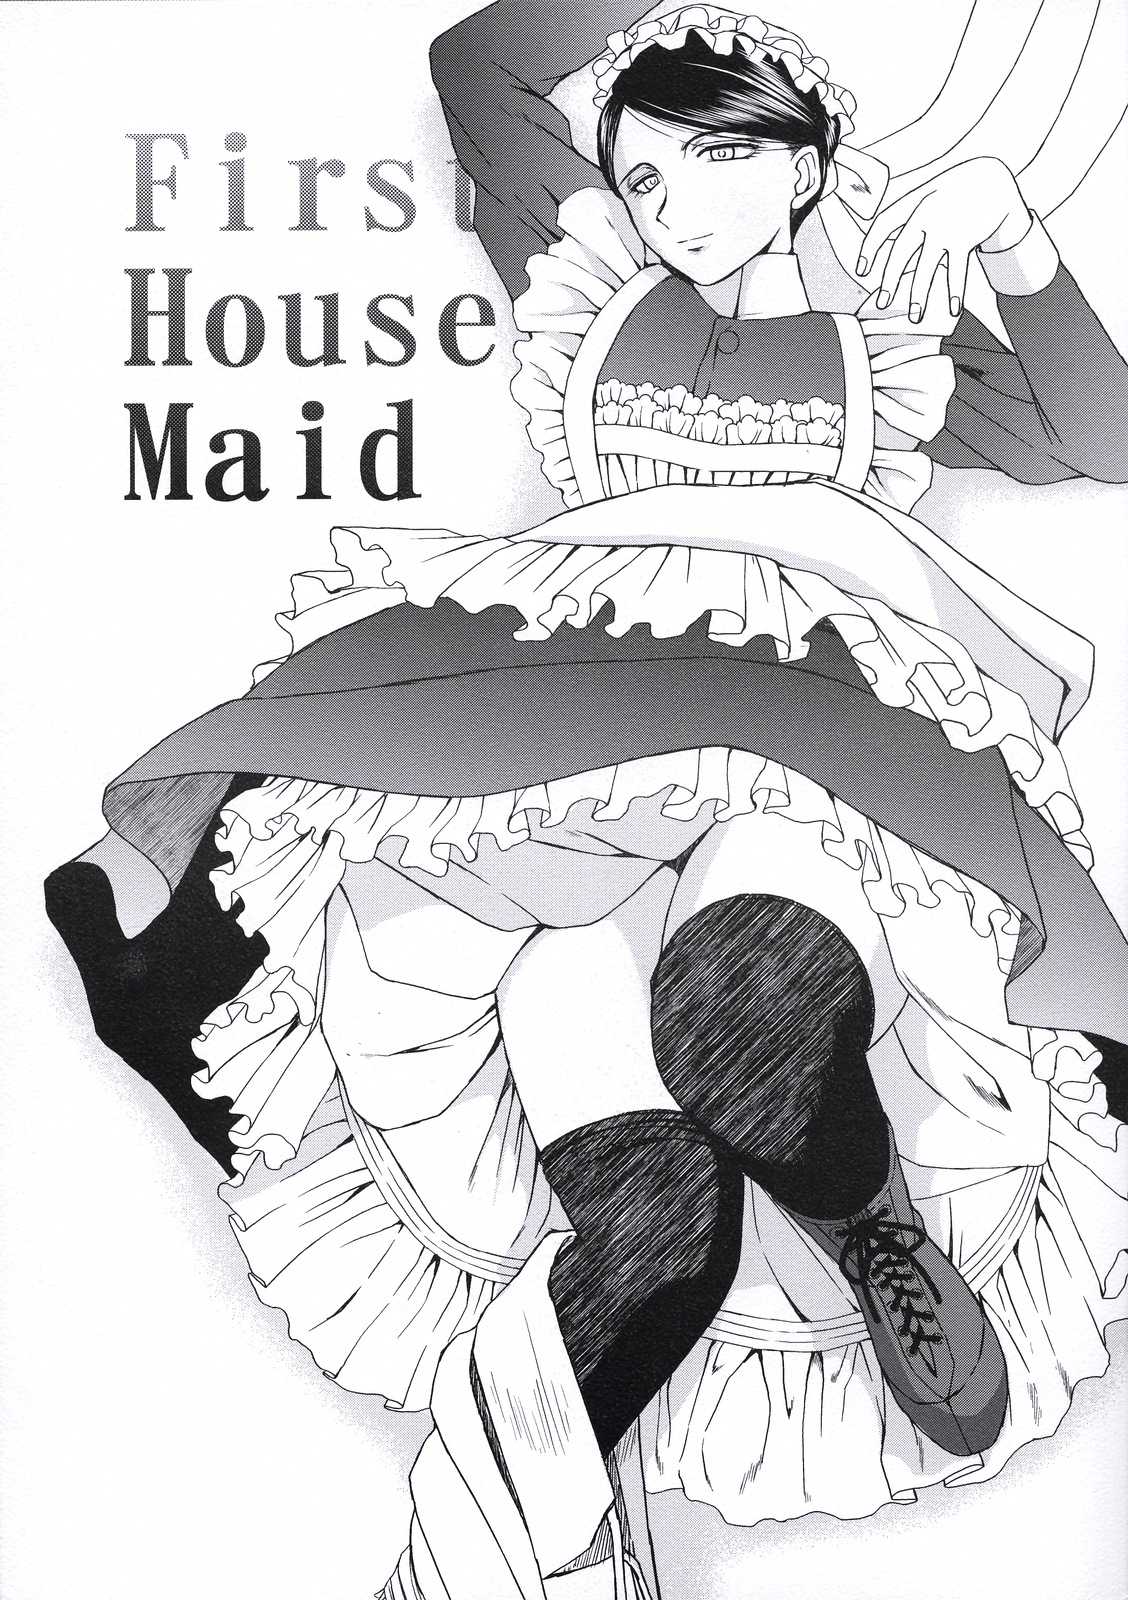 [CIRCLE OUTER WORLD] First House Maid (emma) [サークルOUTERWORLD] First House Maid (エマ)